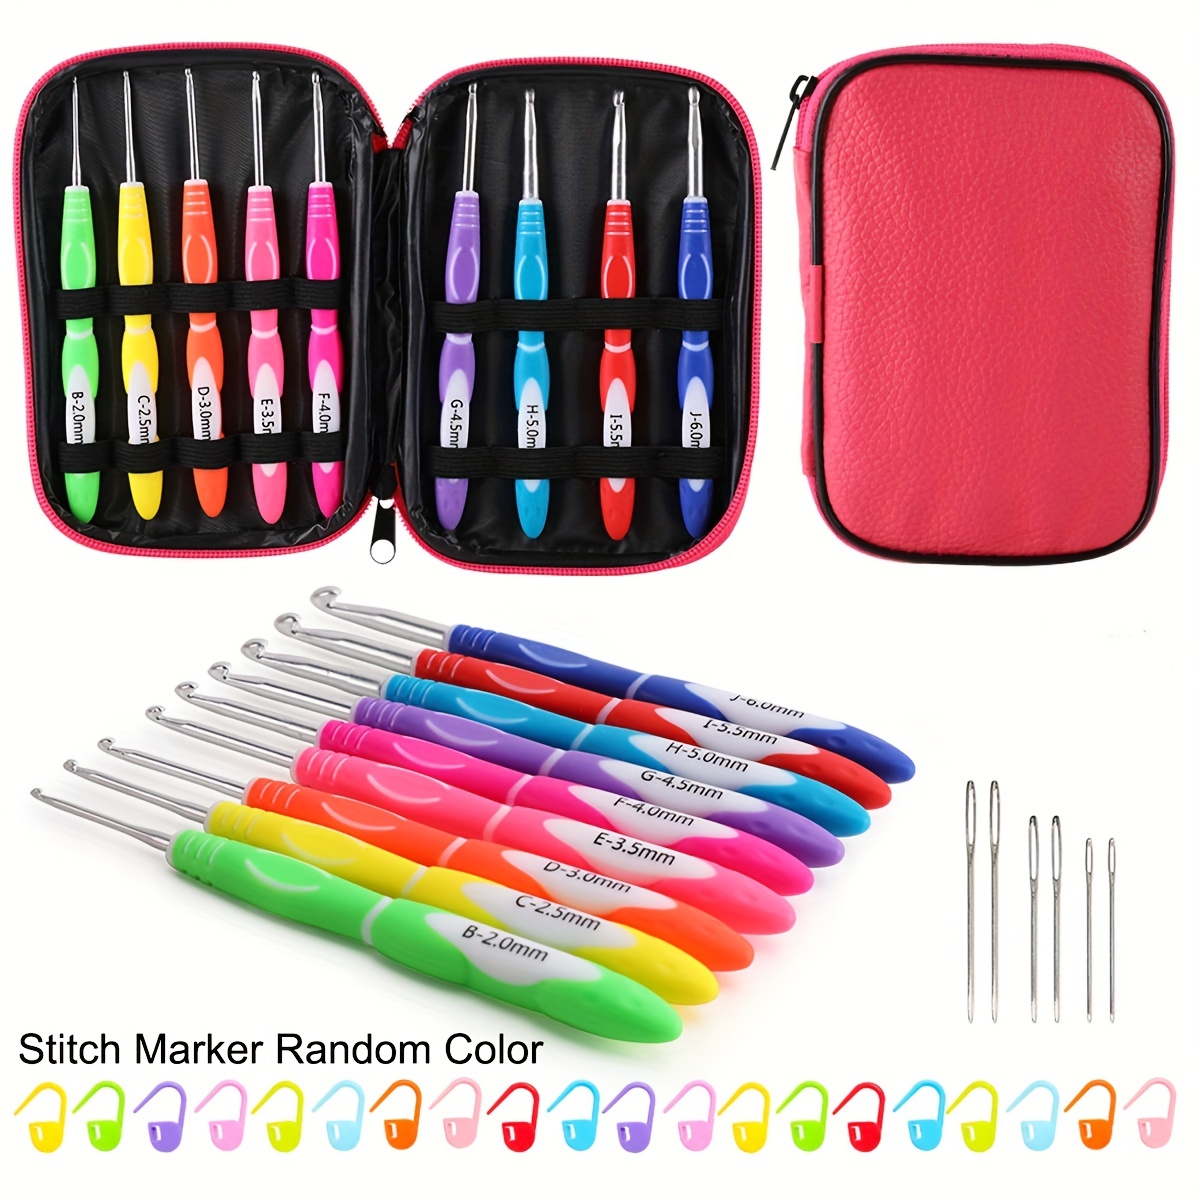 KOKNIT Crochet Hooks Set with Case,9 Ergonomic Crochet Hooks with Soft  Grip,12 Aluminum,Full Crochet Kit for Beginners Adults with Crochet Tools  and